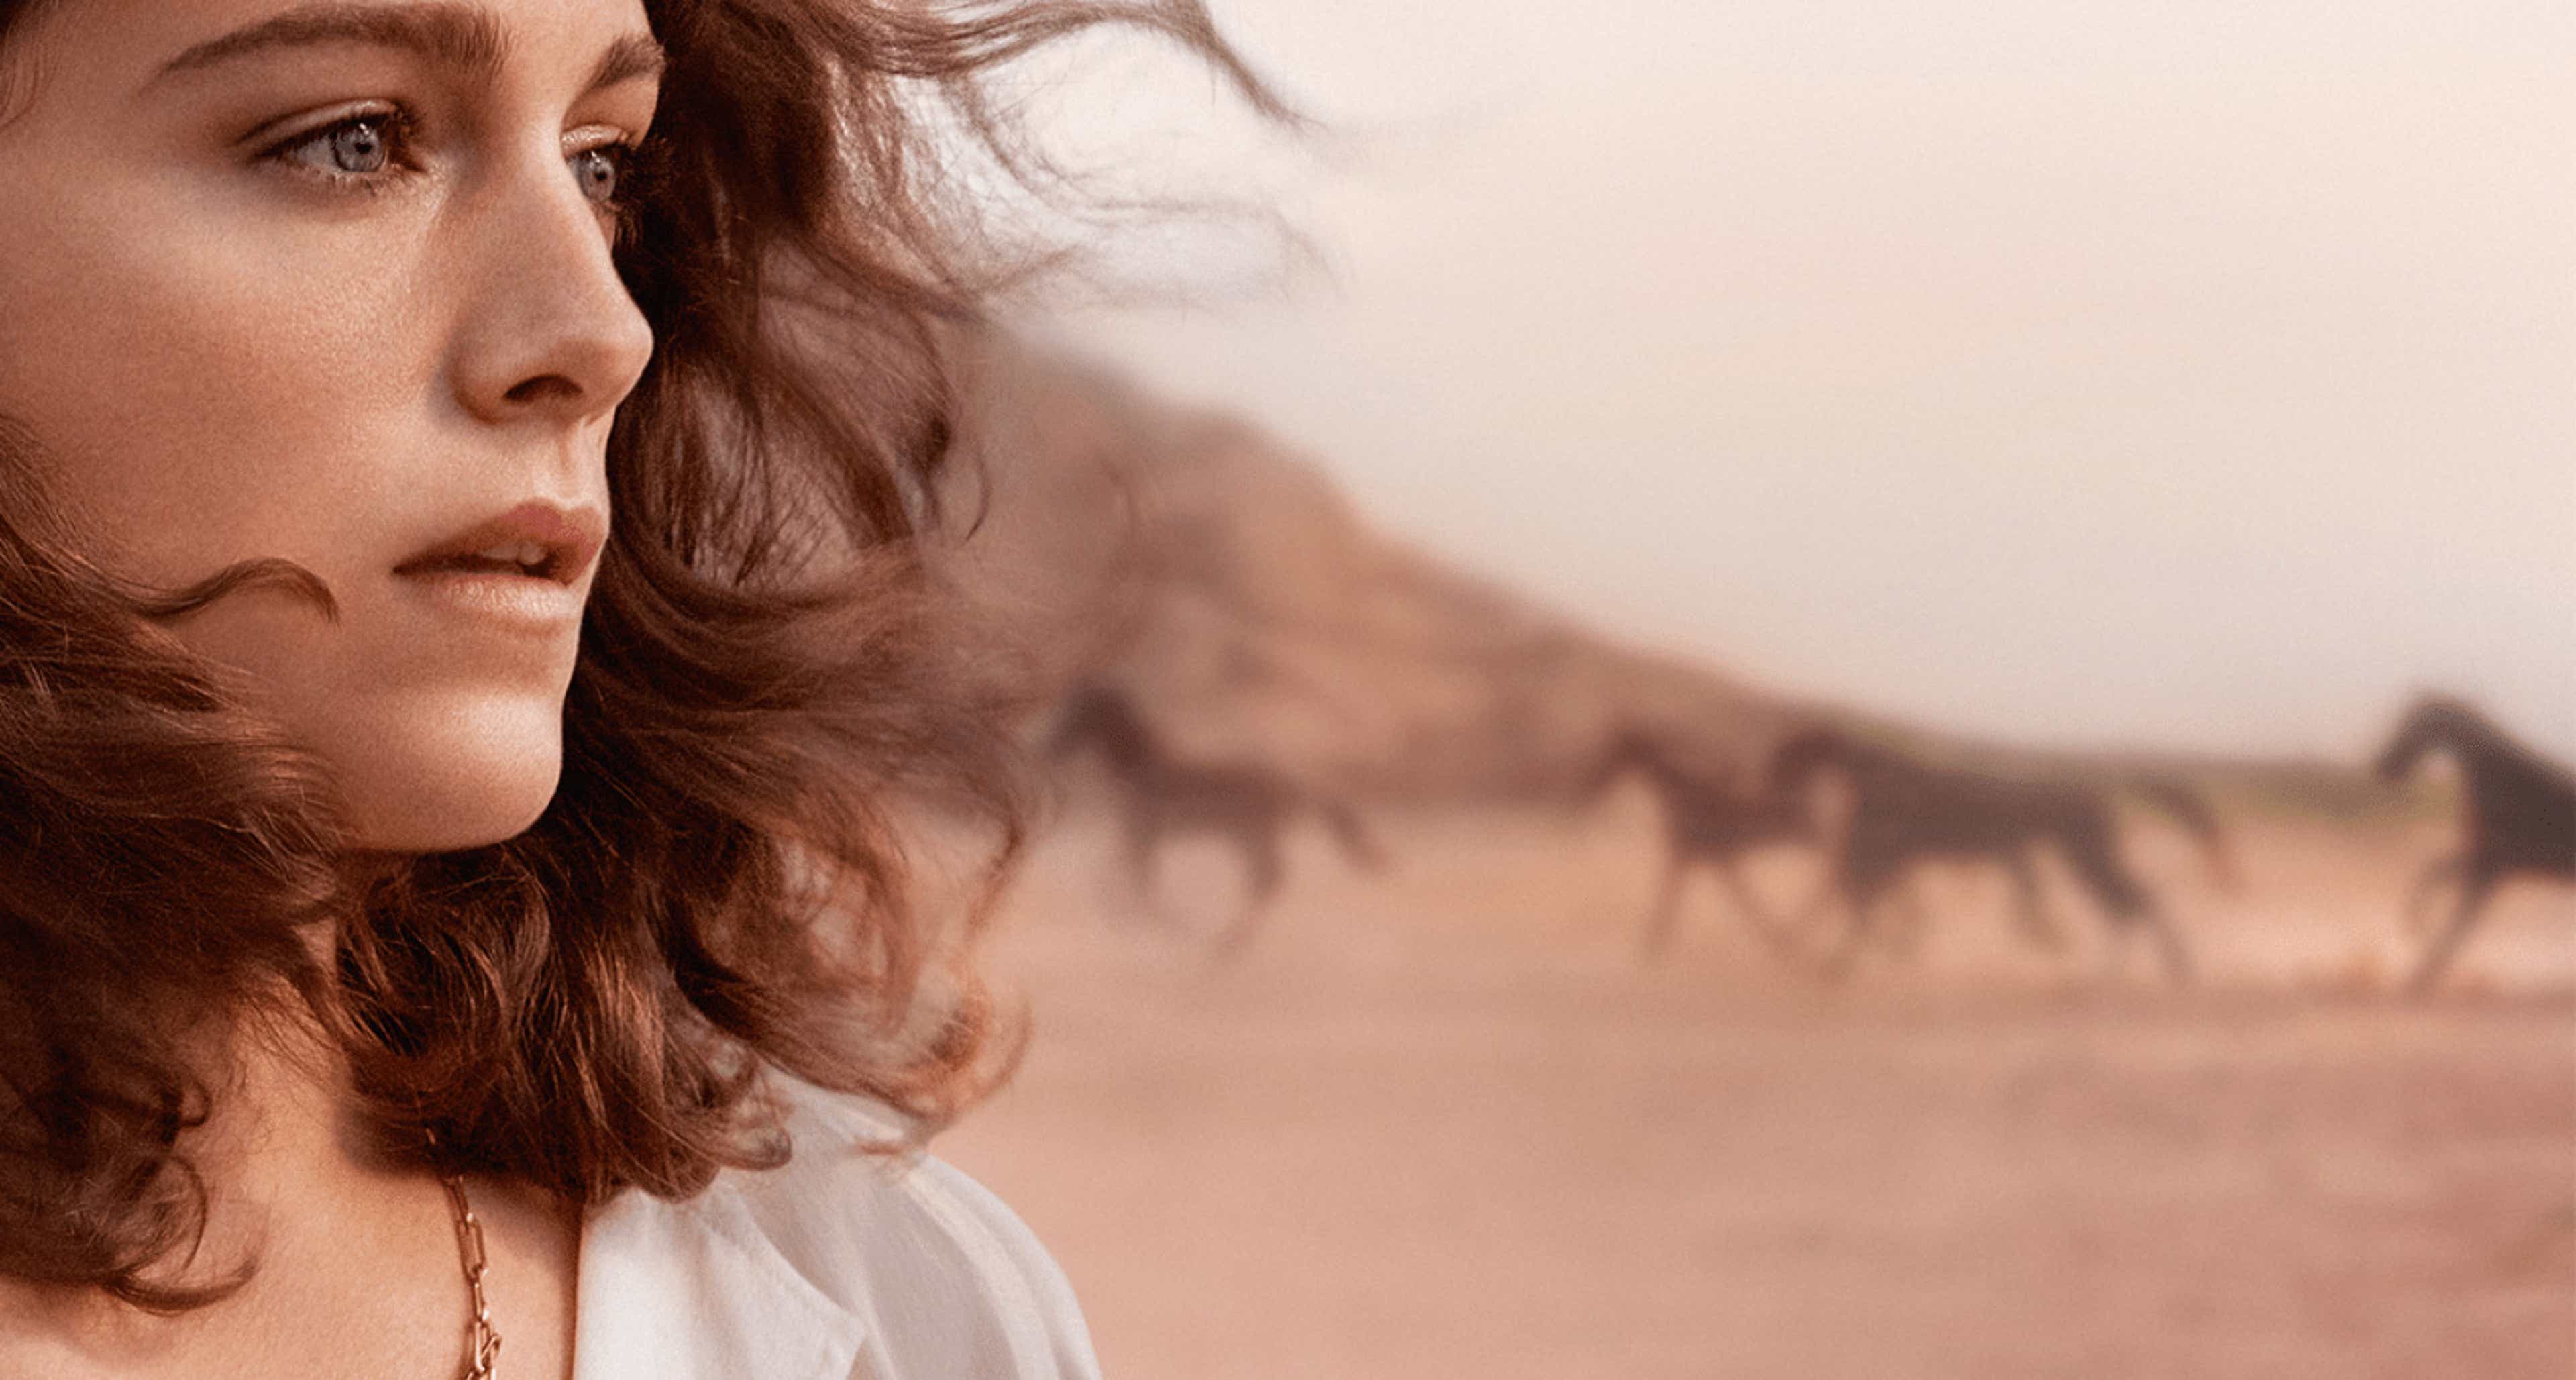 Ariane Labed is the face of new Chloé fragrance